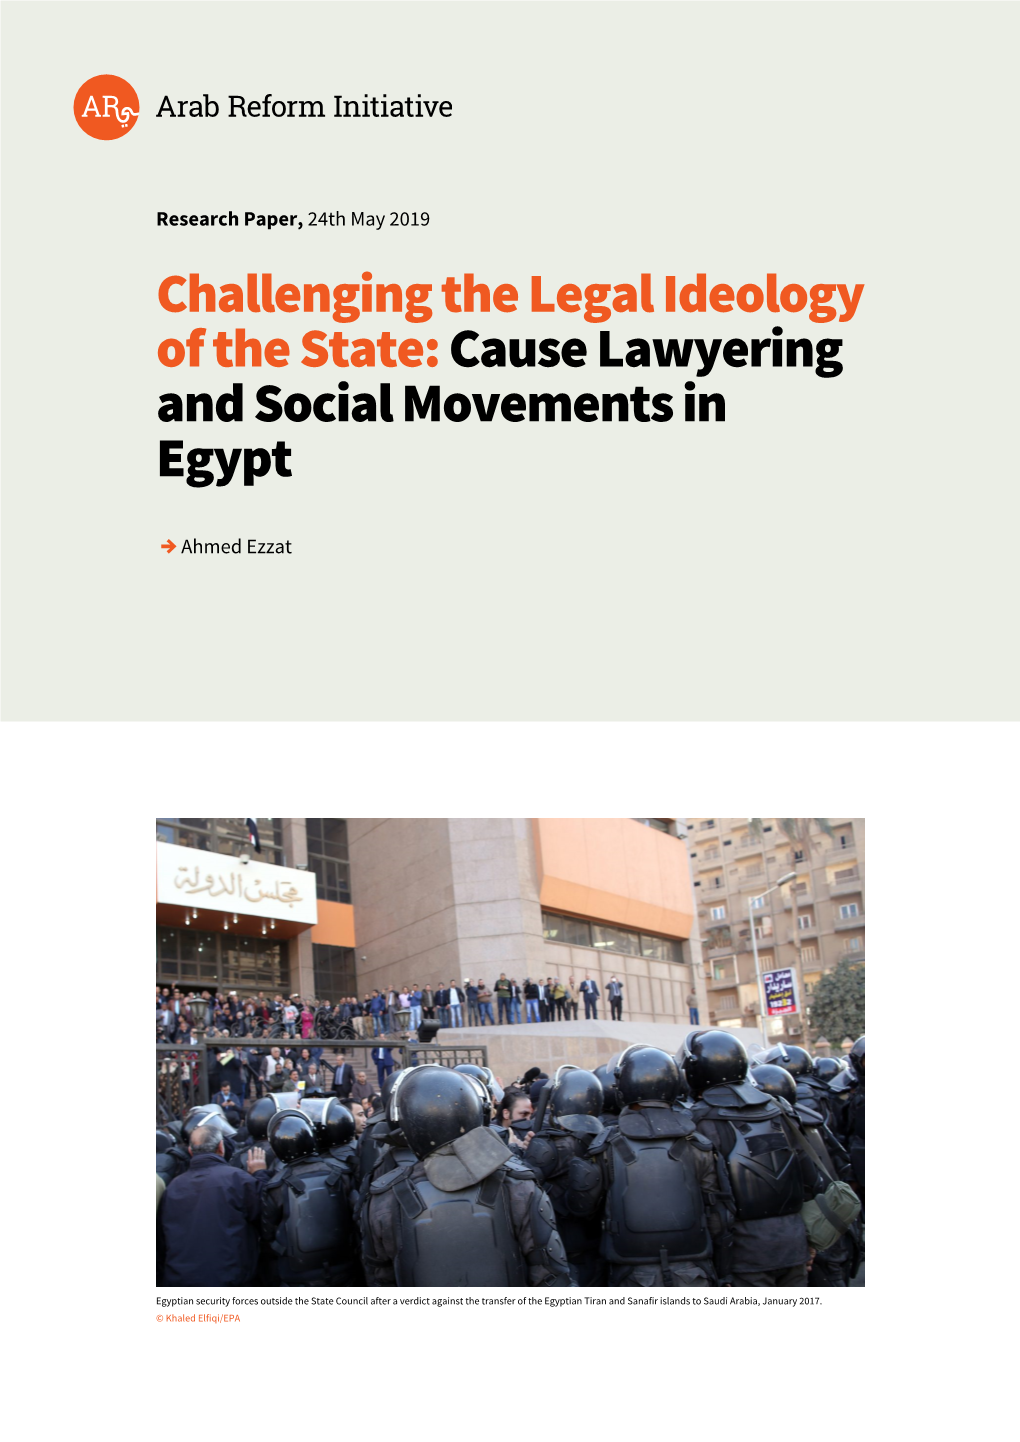 Cause Lawyering and Social Movements in Egypt